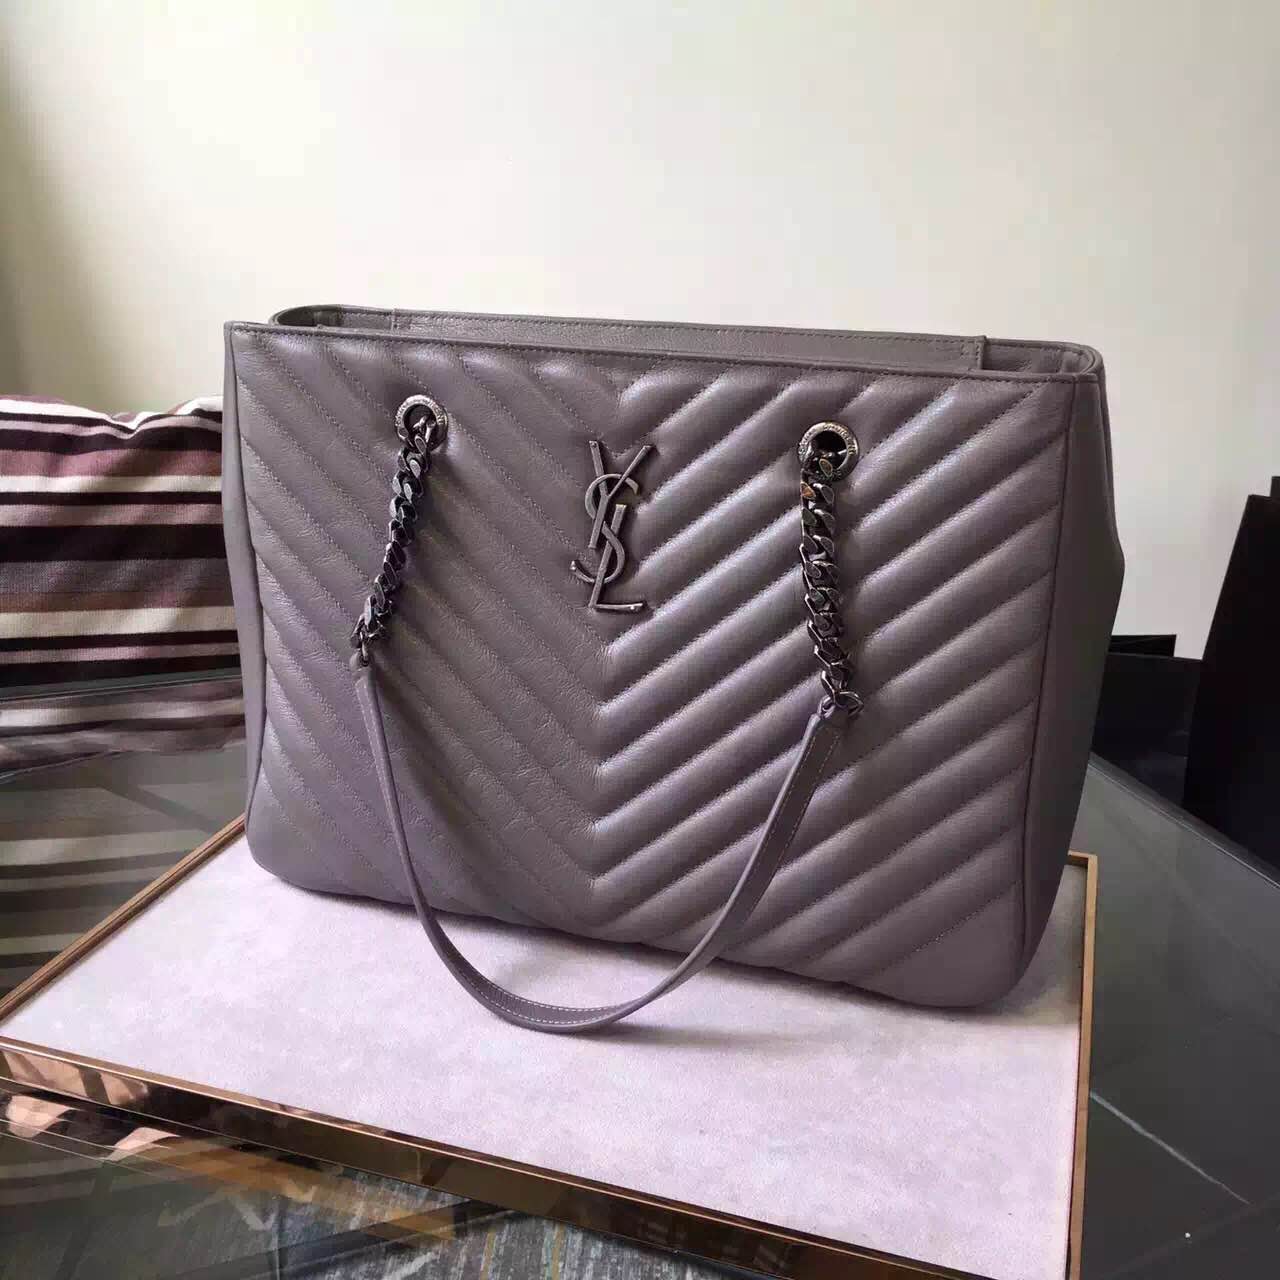 New Arrival!2016 Cheap YSL Out Sale with Free Shipping-Saint Laurent Classic Monogram Shopping Bag in Marble MATELASSÉ Leather